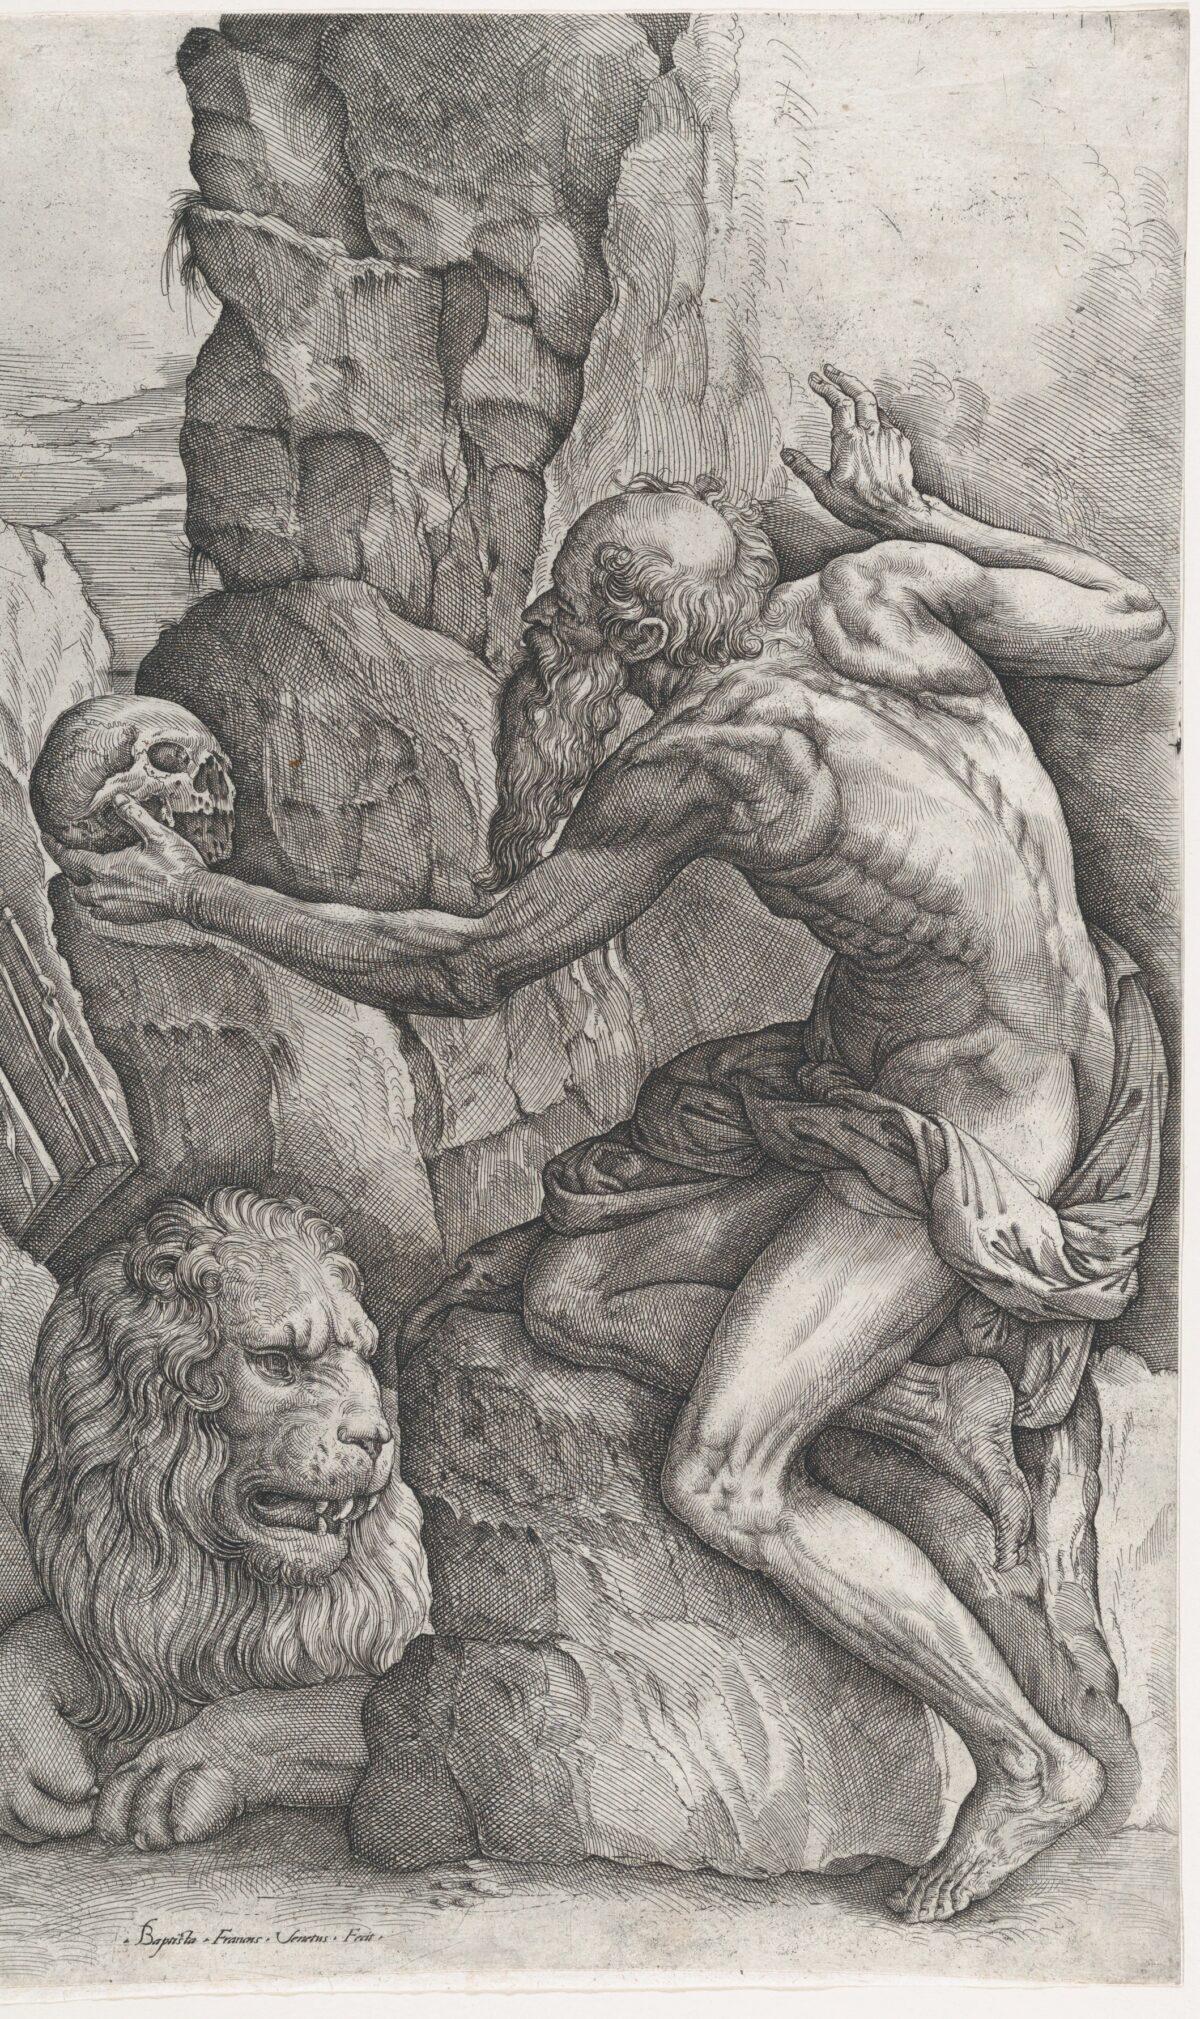 A detail from “Saint Jerome,” circa 1550-60, by Battista Franco. Etching, engraving, and drypoint, second state of three. Harris Brisbane Dick Fund, 1953; The Metropolitan Museum of Art, New York. (Public Domain)